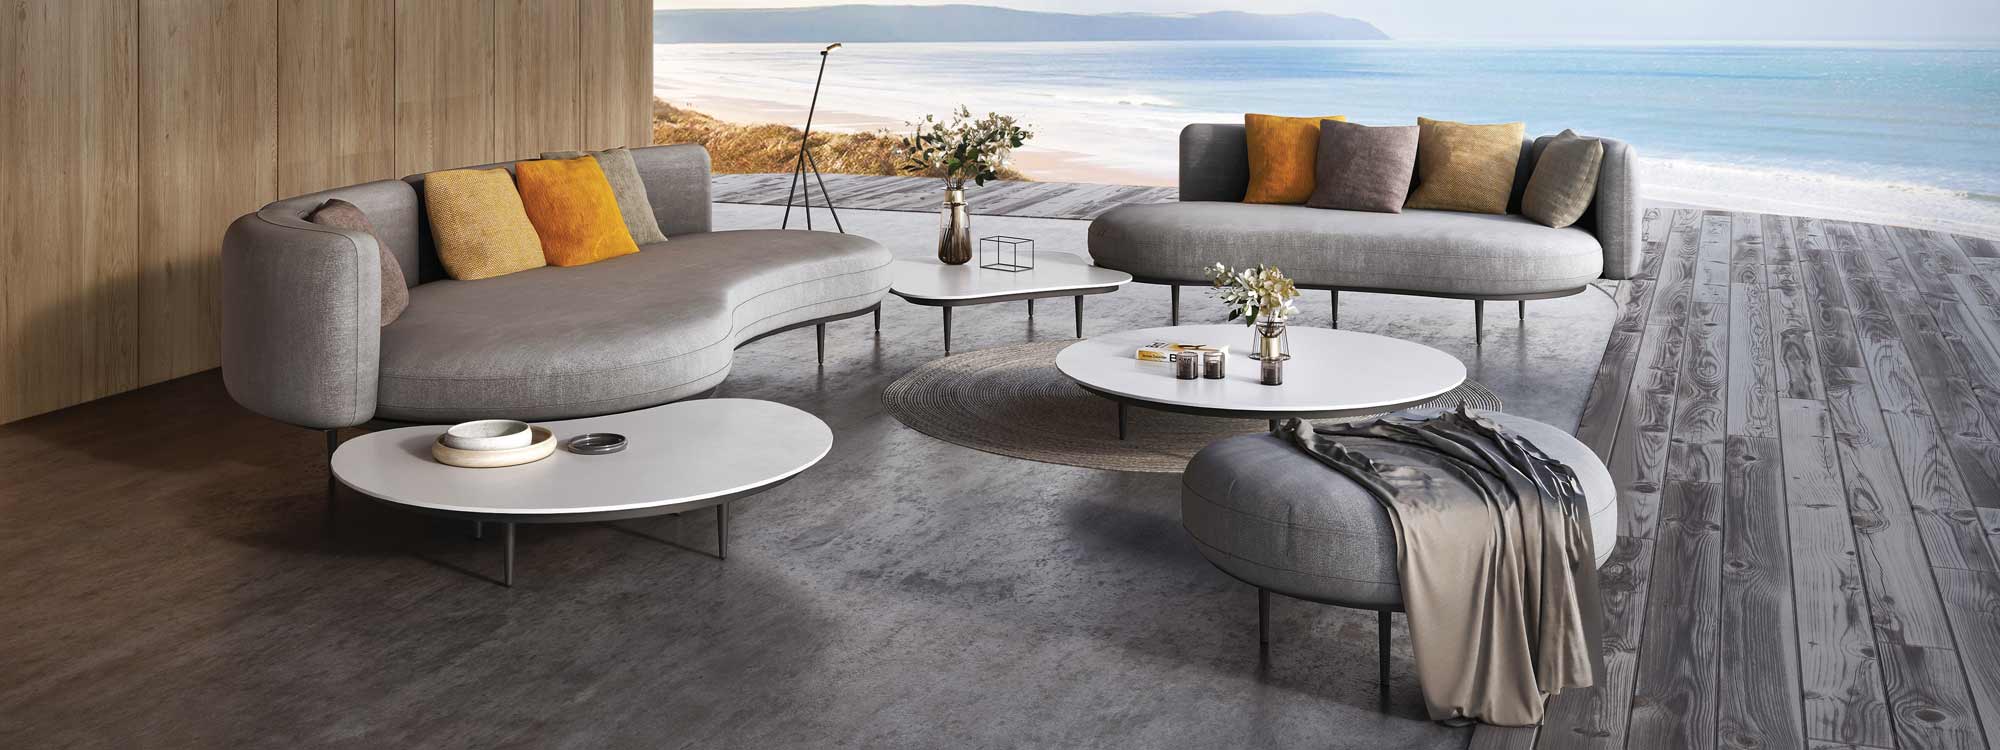 Image of Royal Botania Organix contemporary garden sofas on poured concrete floor, with beach and sea in the background